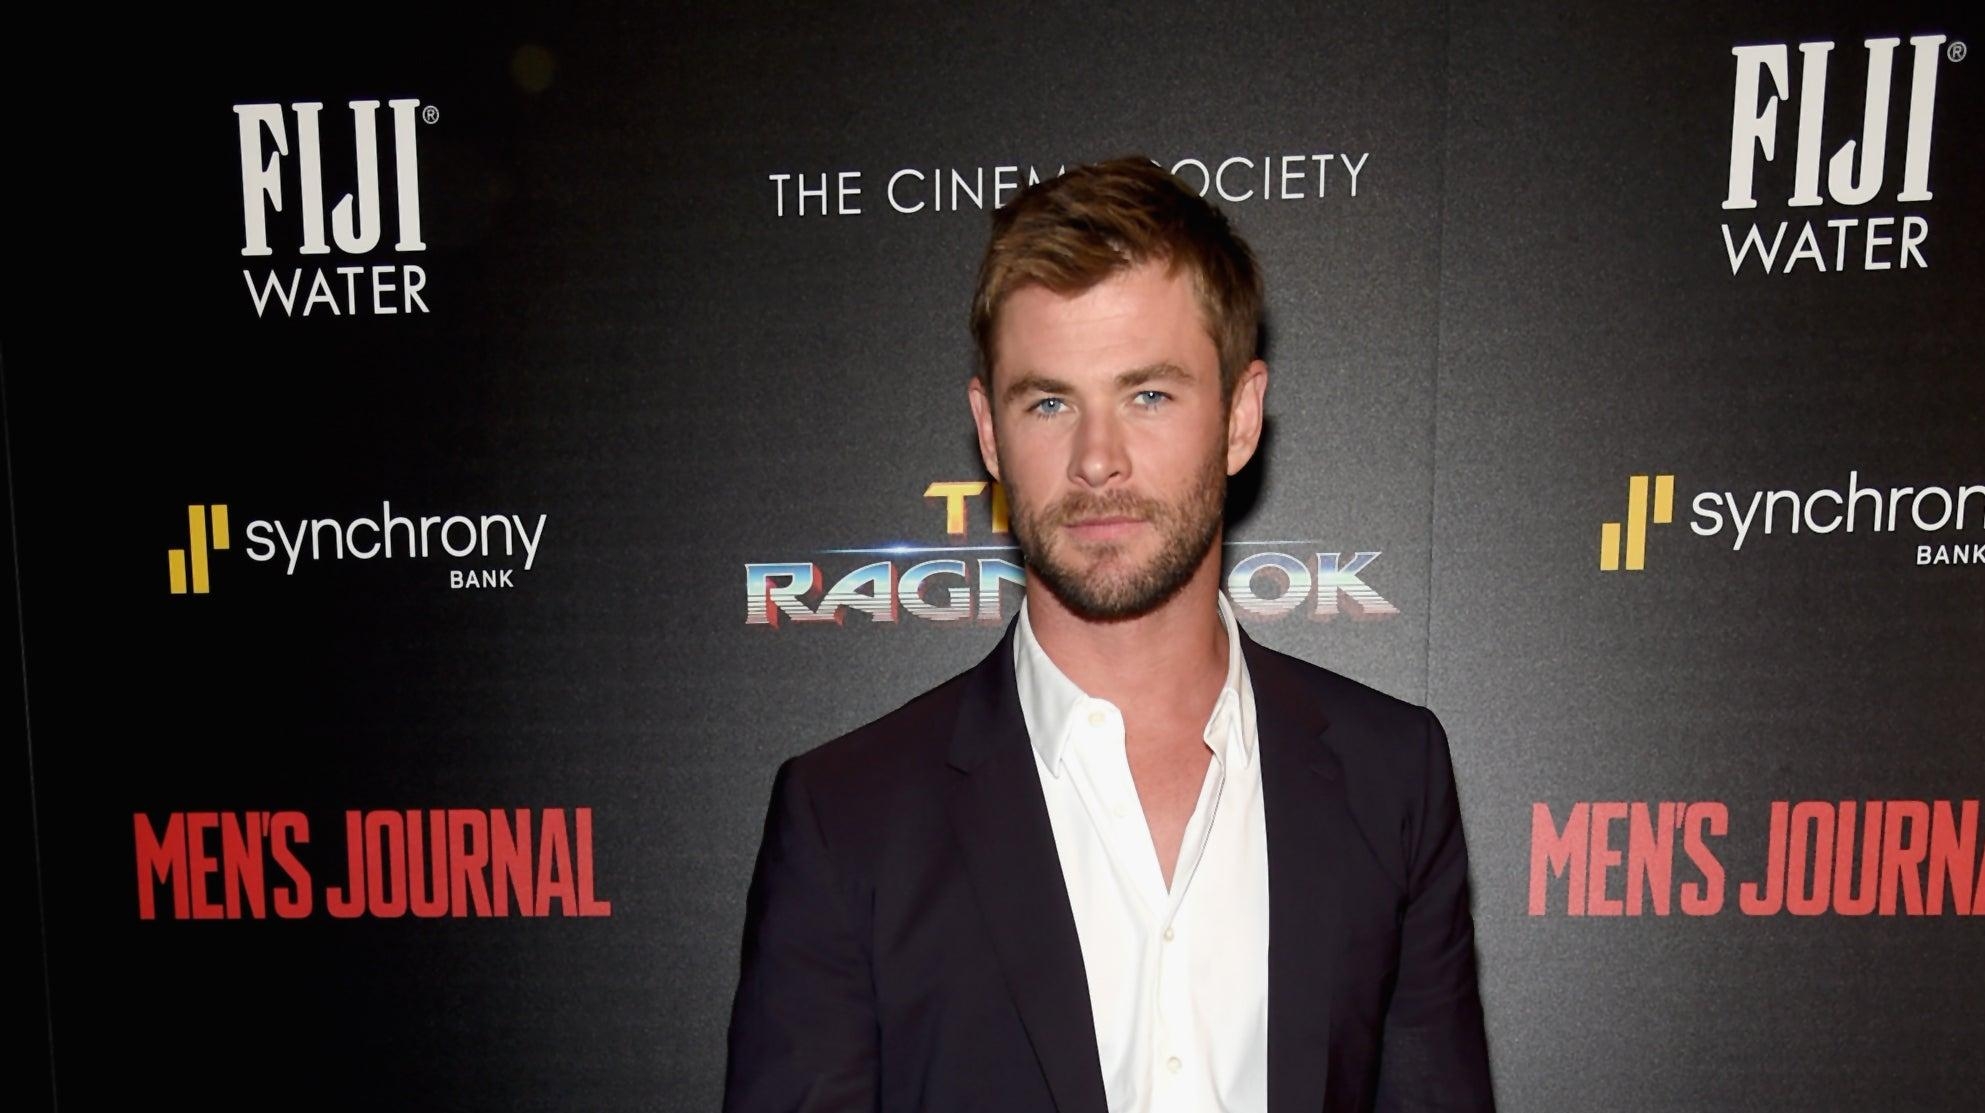 Chris Hemsworth's son, the spawn of Thor, would rather be Superman